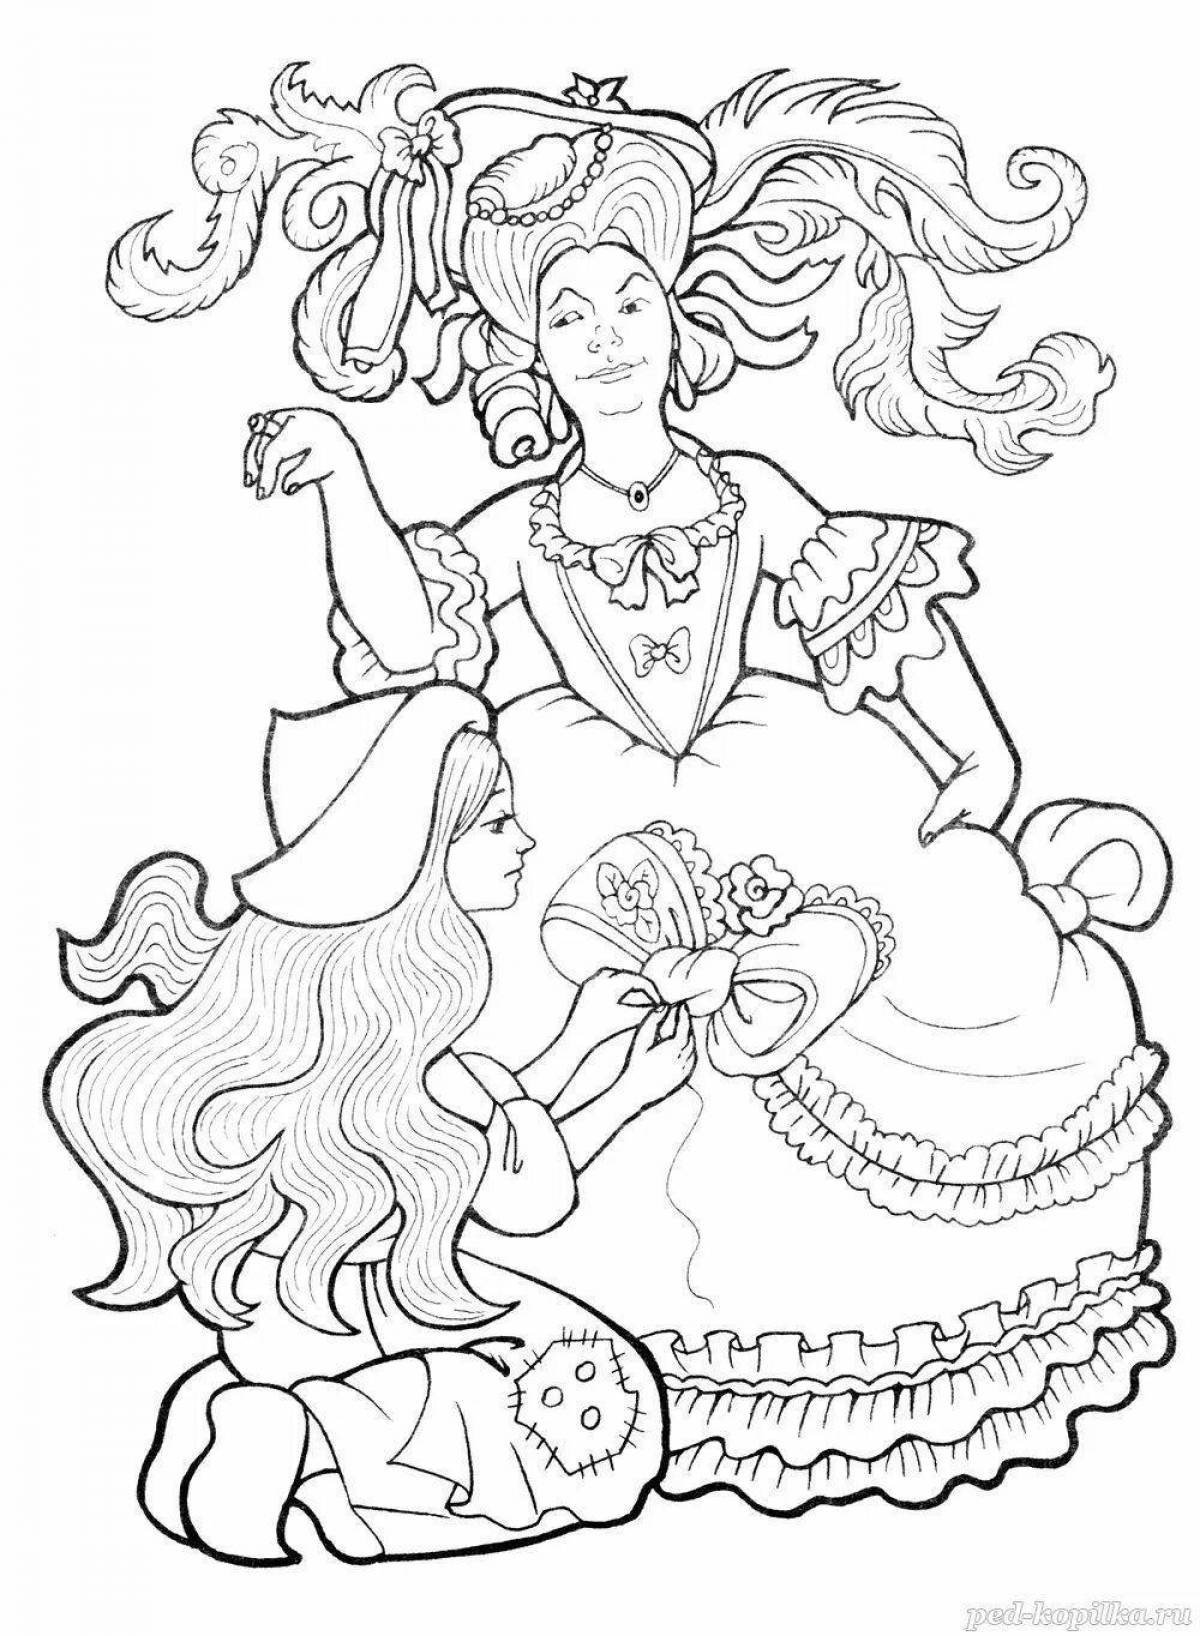 Coloring book amazing Cinderella and Charles Perrault